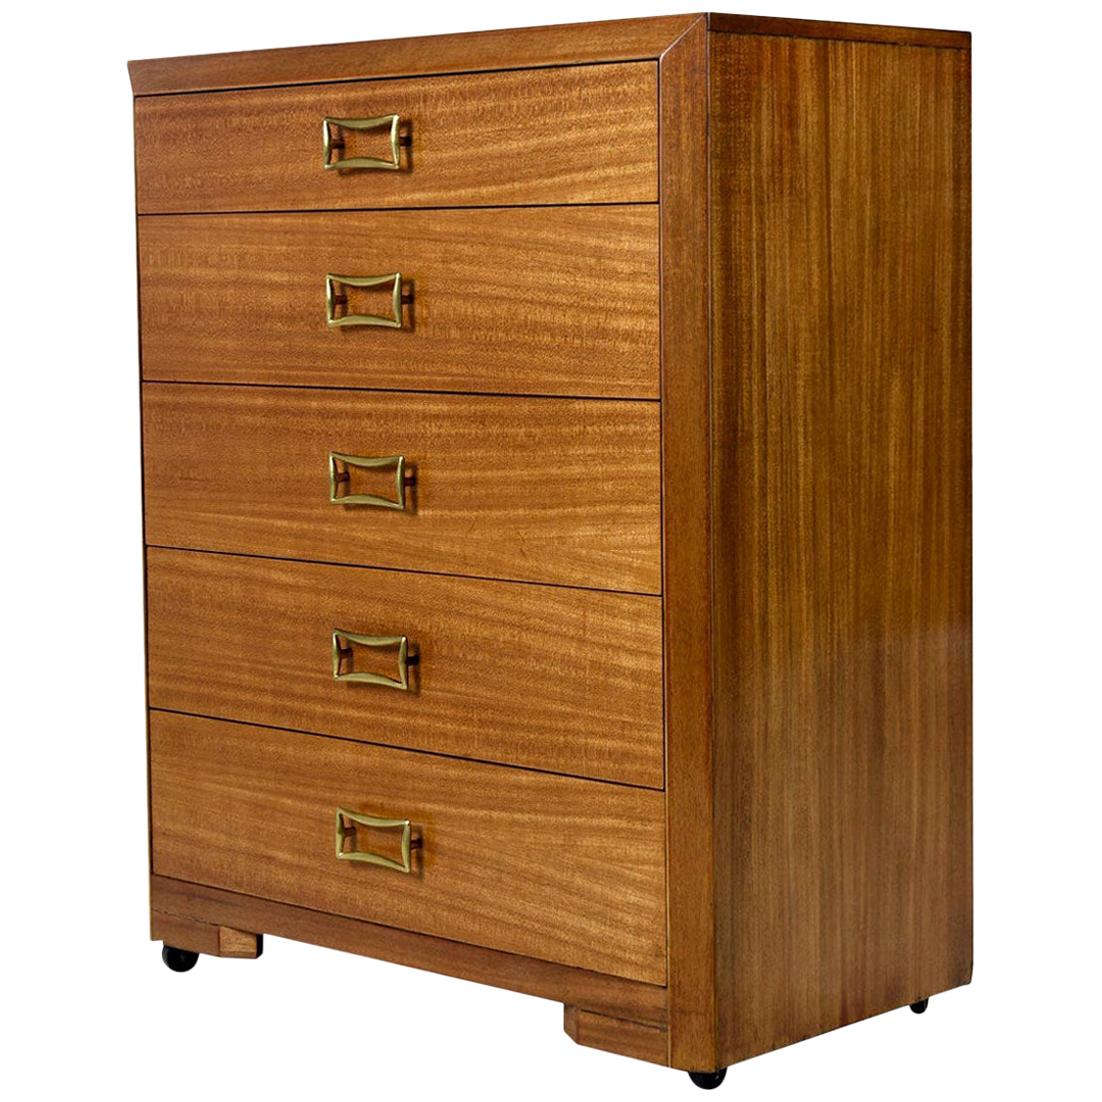 Yellow mahogany highboy dresser chest of drawers by Robsjohn-Gibbings for Widdicomb. This early representation by Widdicomb is at the turning point between machine age and modern. The mahogany has aged to a rich honey color. Sleek and stately with